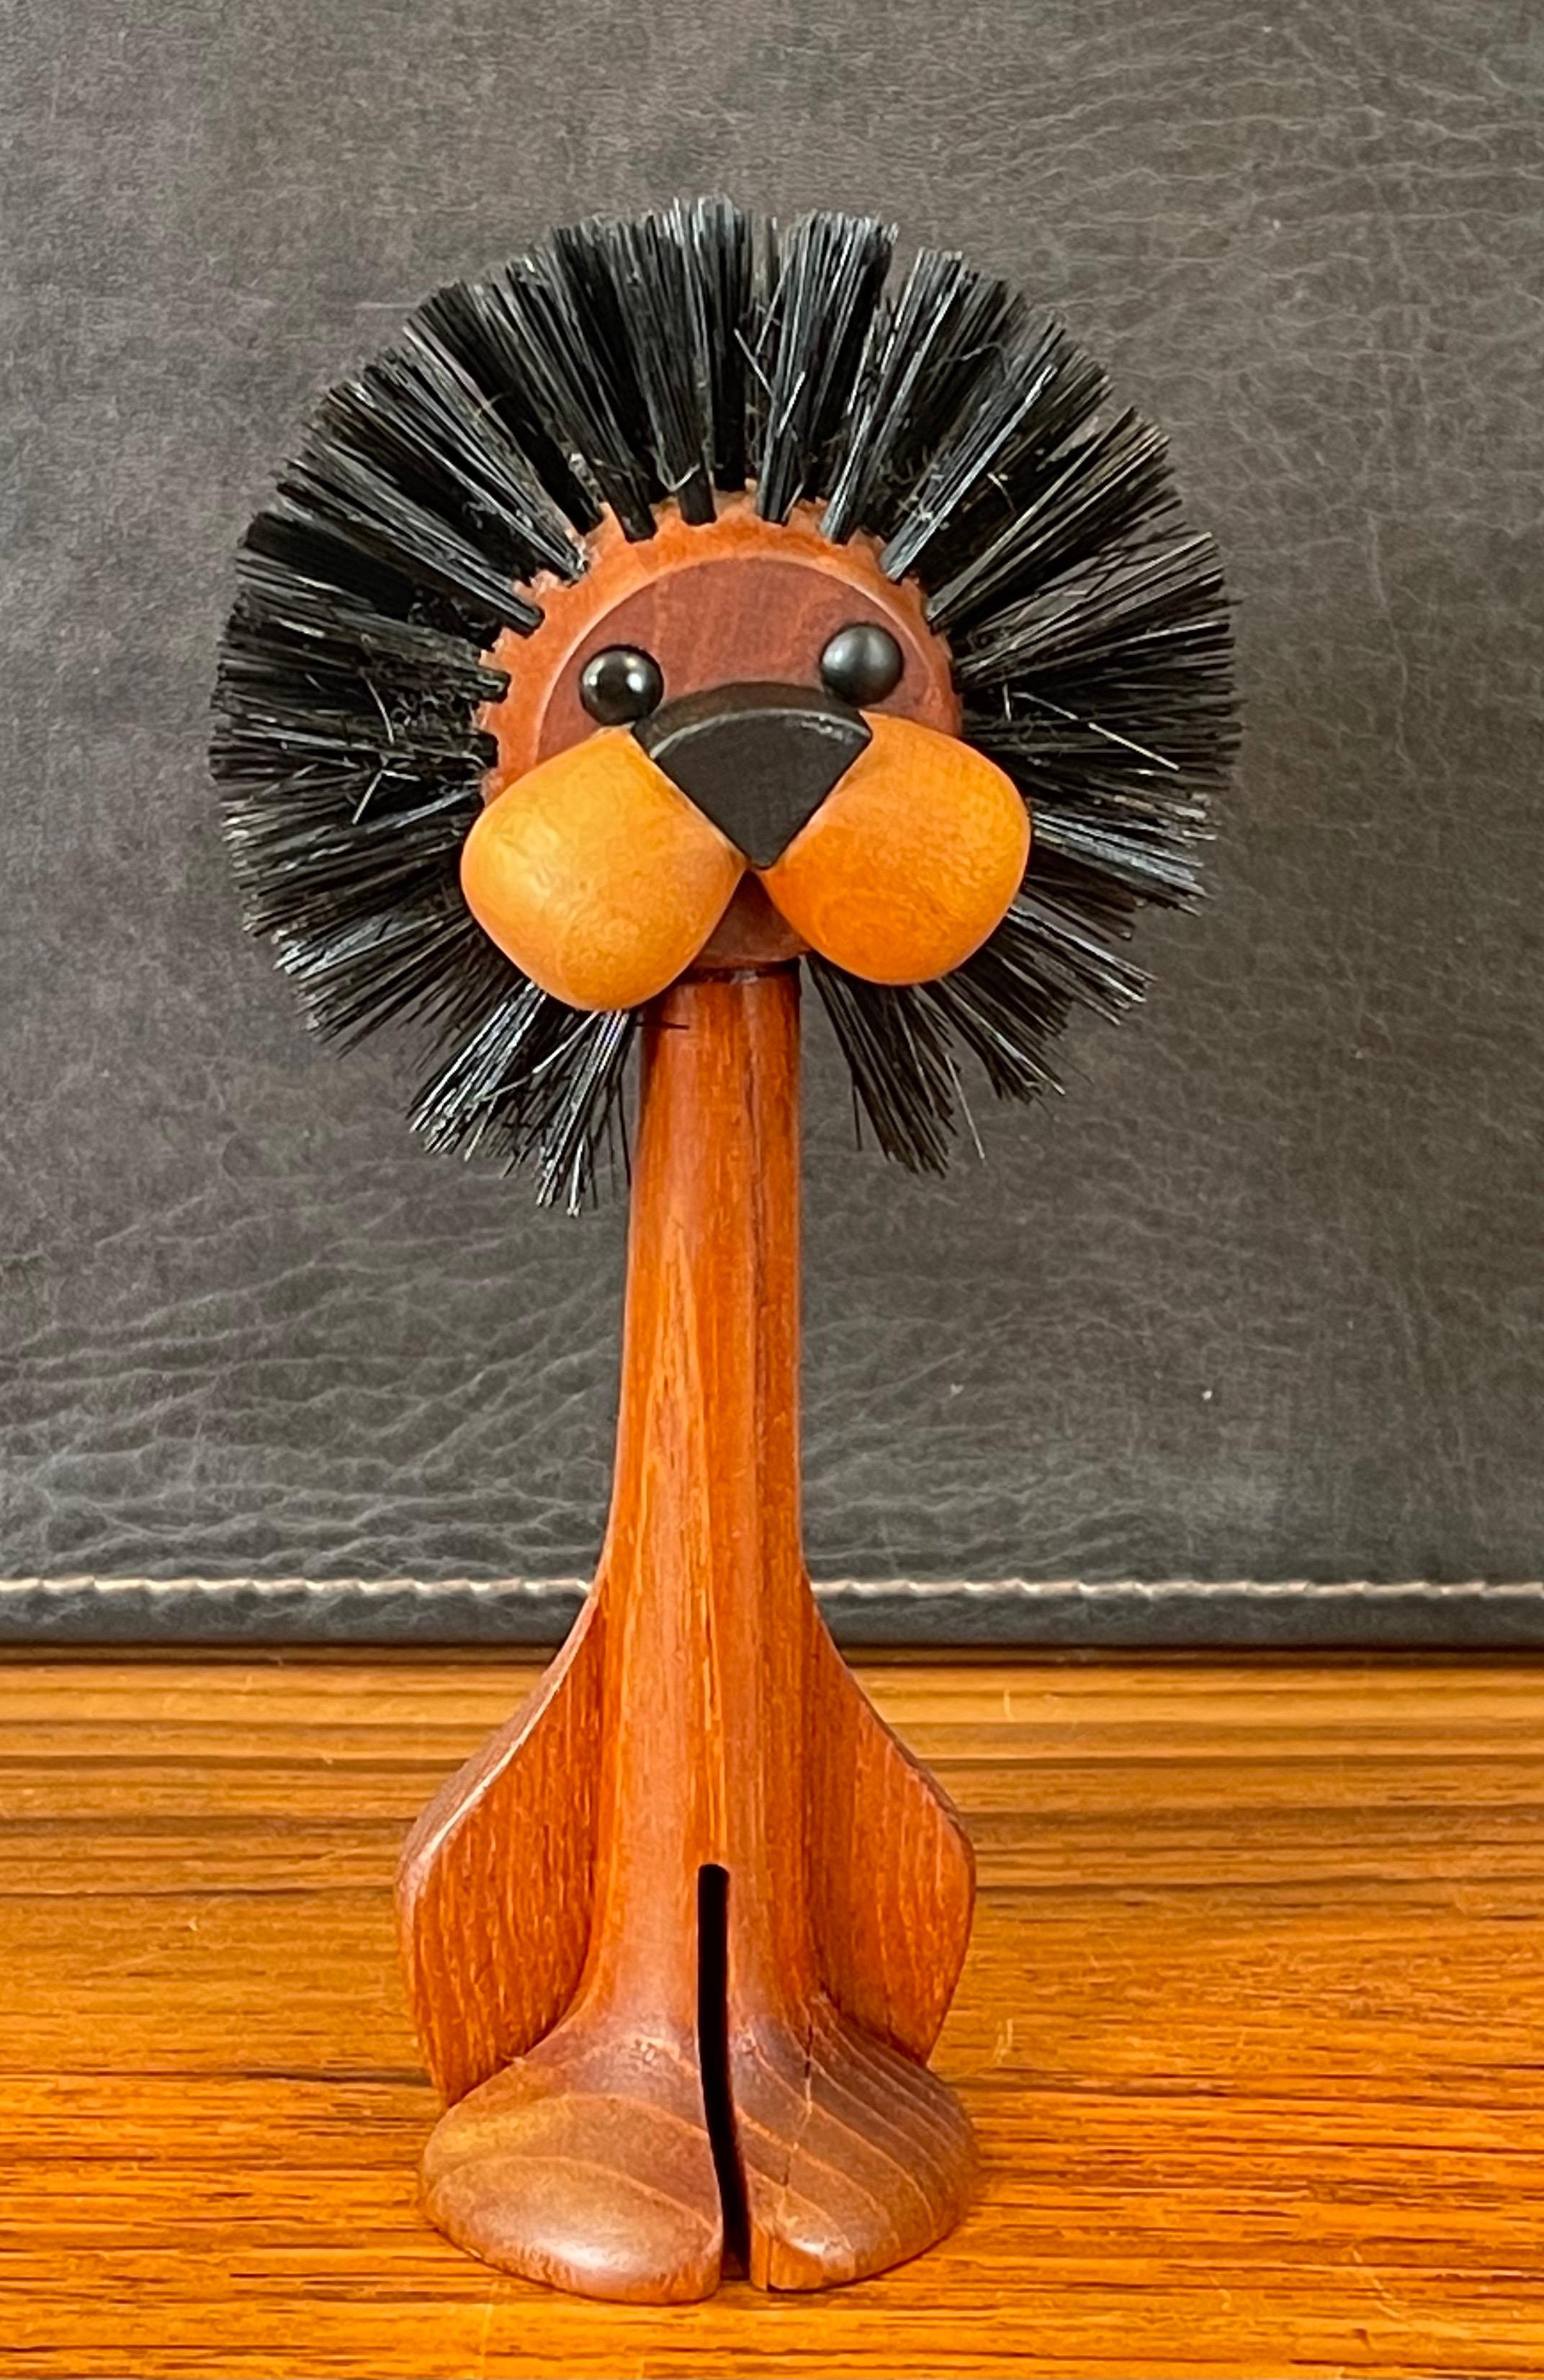 Danish modern solid teak carved lion toy / lint brush by Laurids Lonborg, circa 1950s. This incredibly fun lion lint brush was originally designed by Lonborg in Denmark and produced during the 1950's. Lonborg's animal figurines sit among the work of